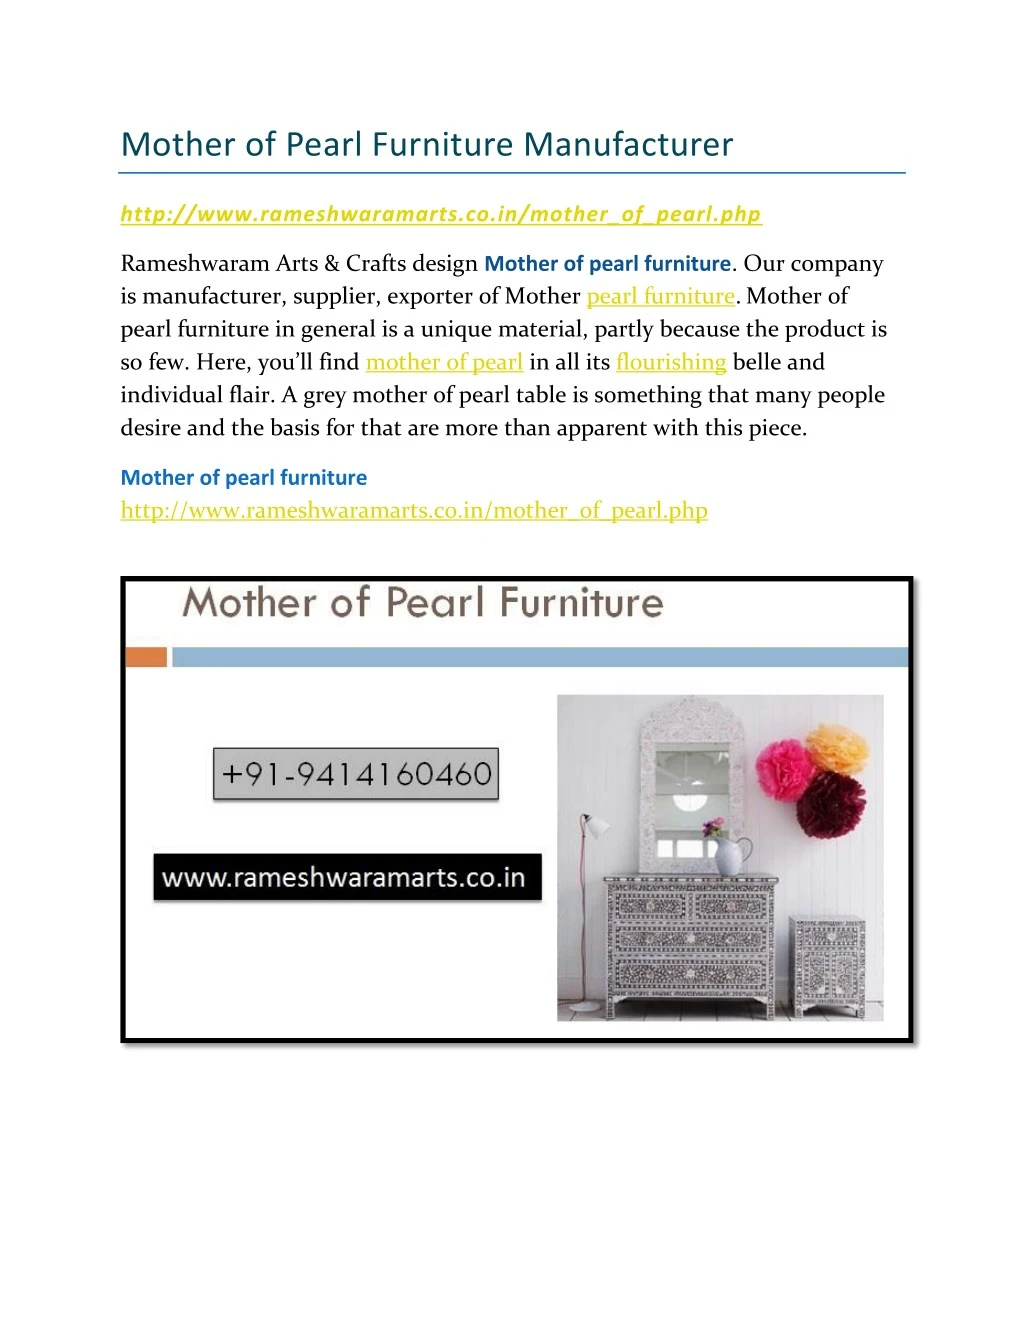 mother of pearl furniture manufacturer